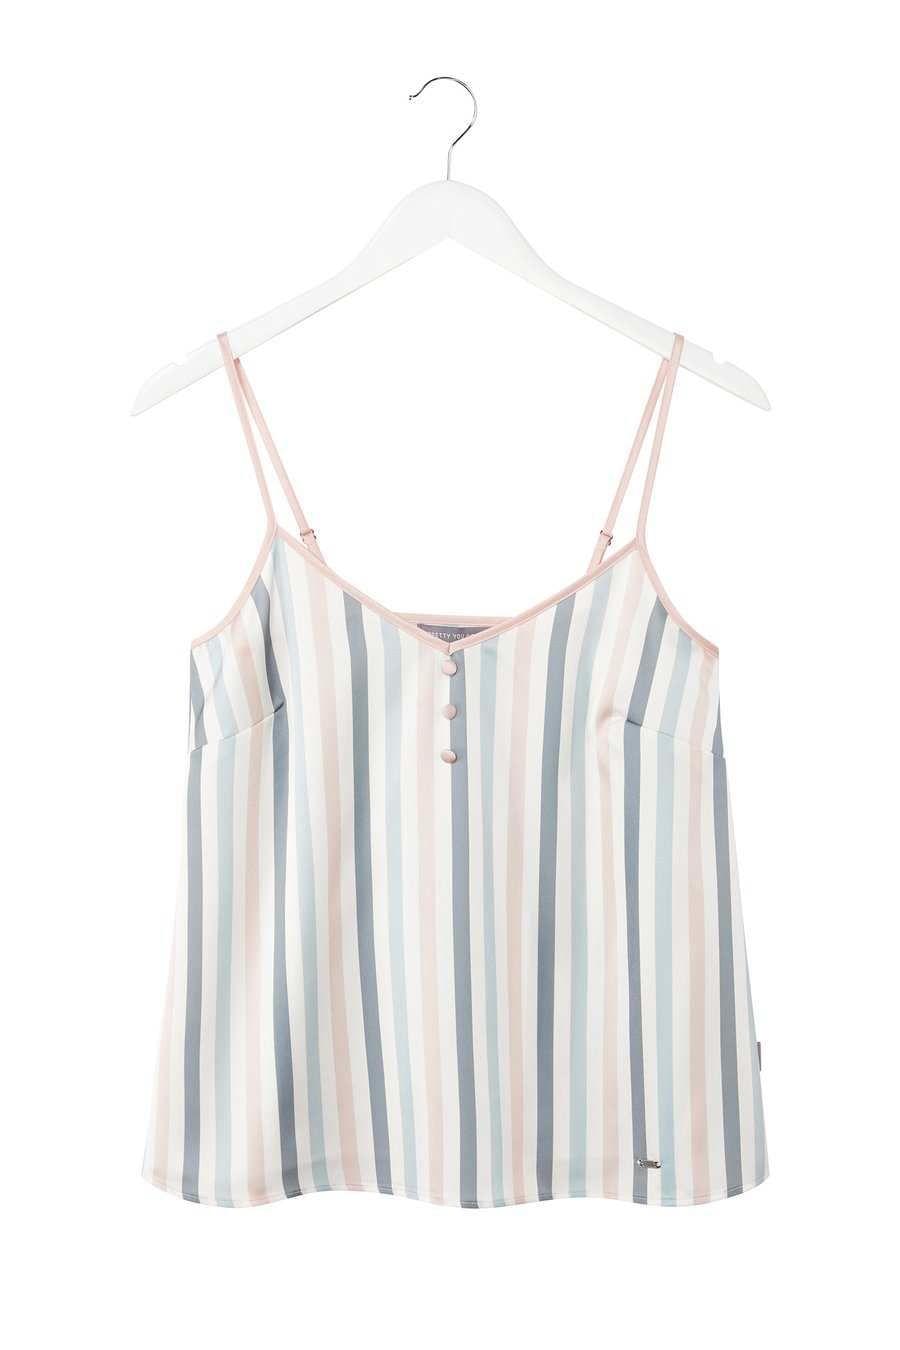 Mix and Match Candy Cami Top in Multi Stripe Colours (Cami only)